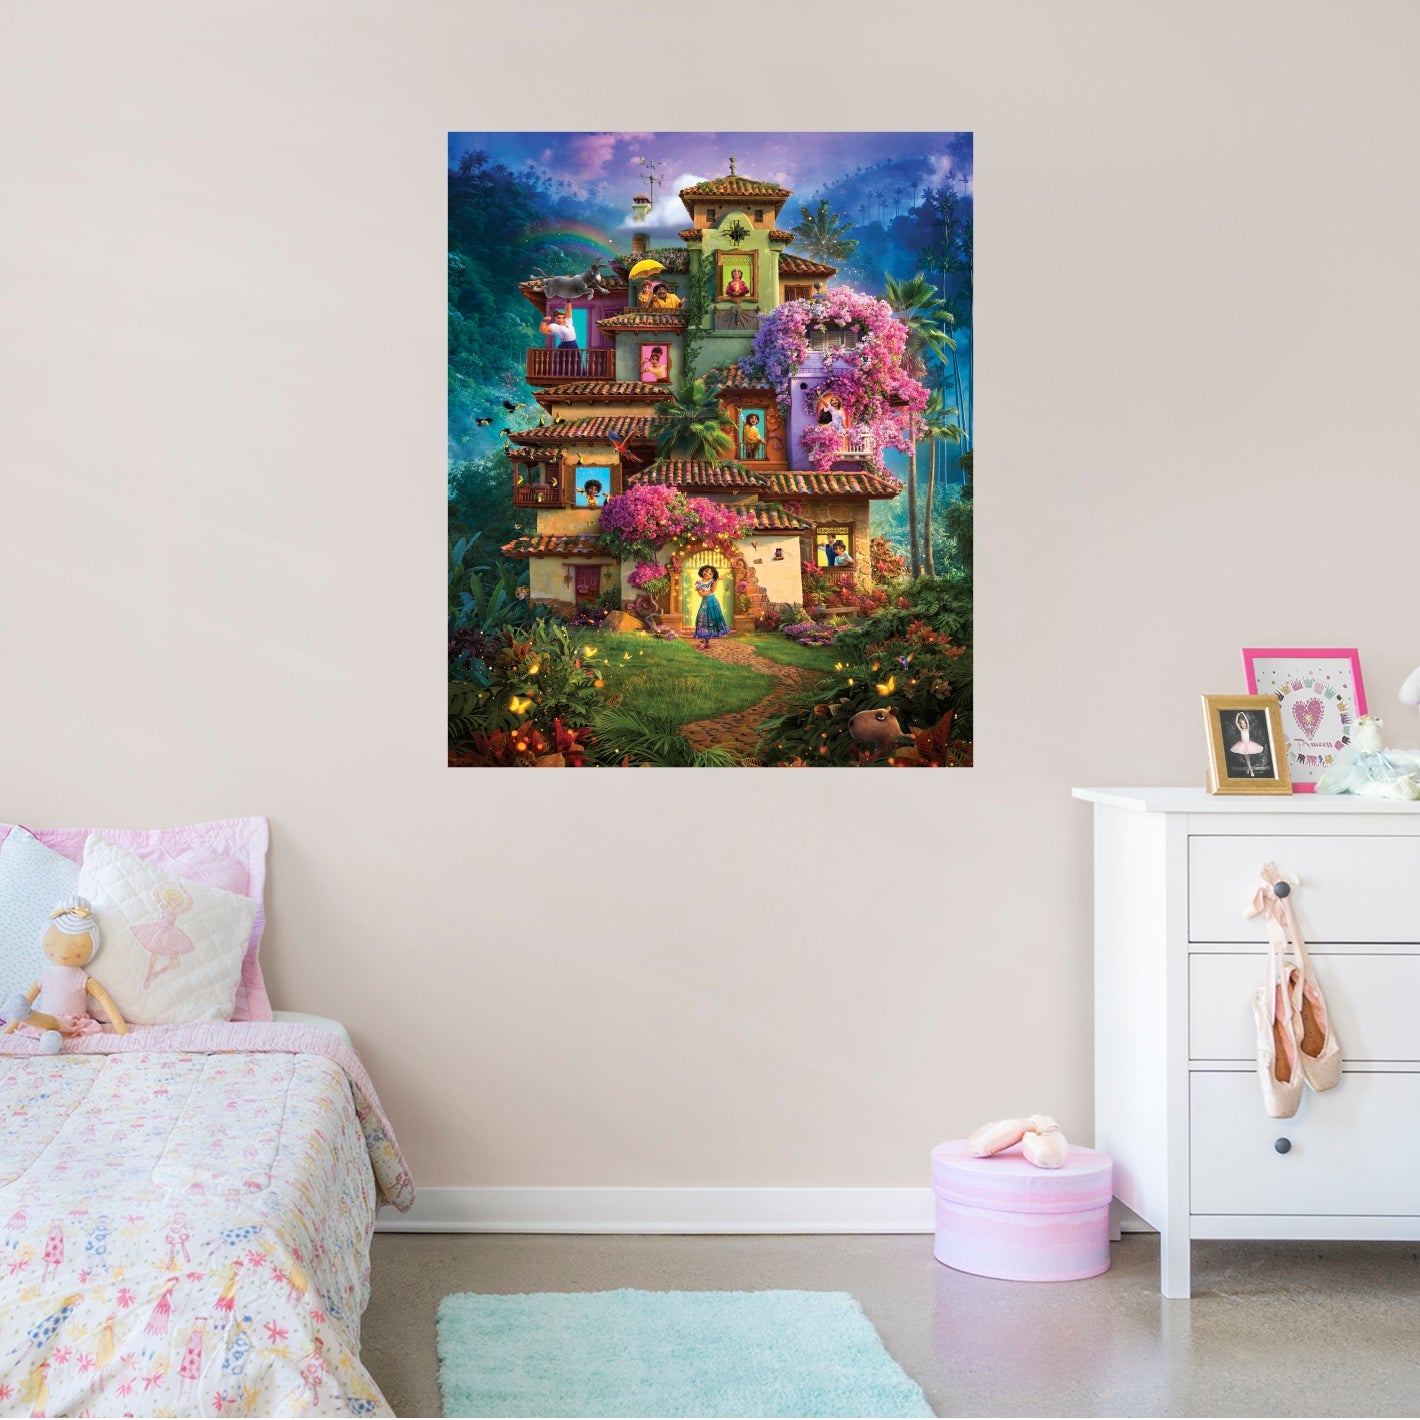 Encanto: Magical Casa Madrigal Poster - Officially Licensed Disney Removable Adhesive Decal